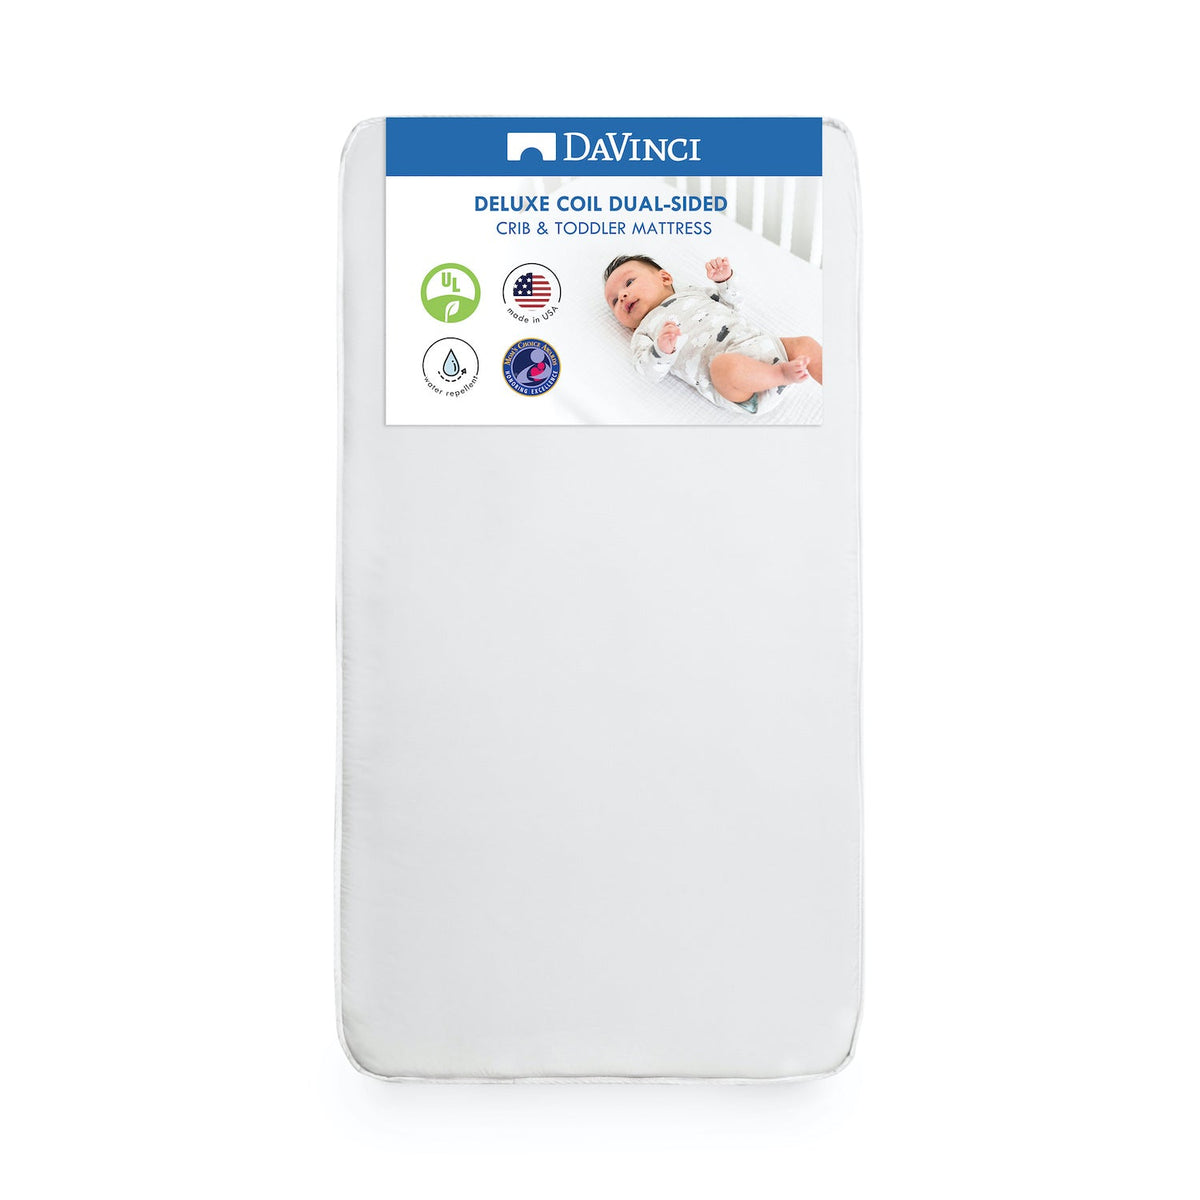 DaVinci Deluxe Coil Dual-sided Crib & Toddler Mattress - Project Nursery